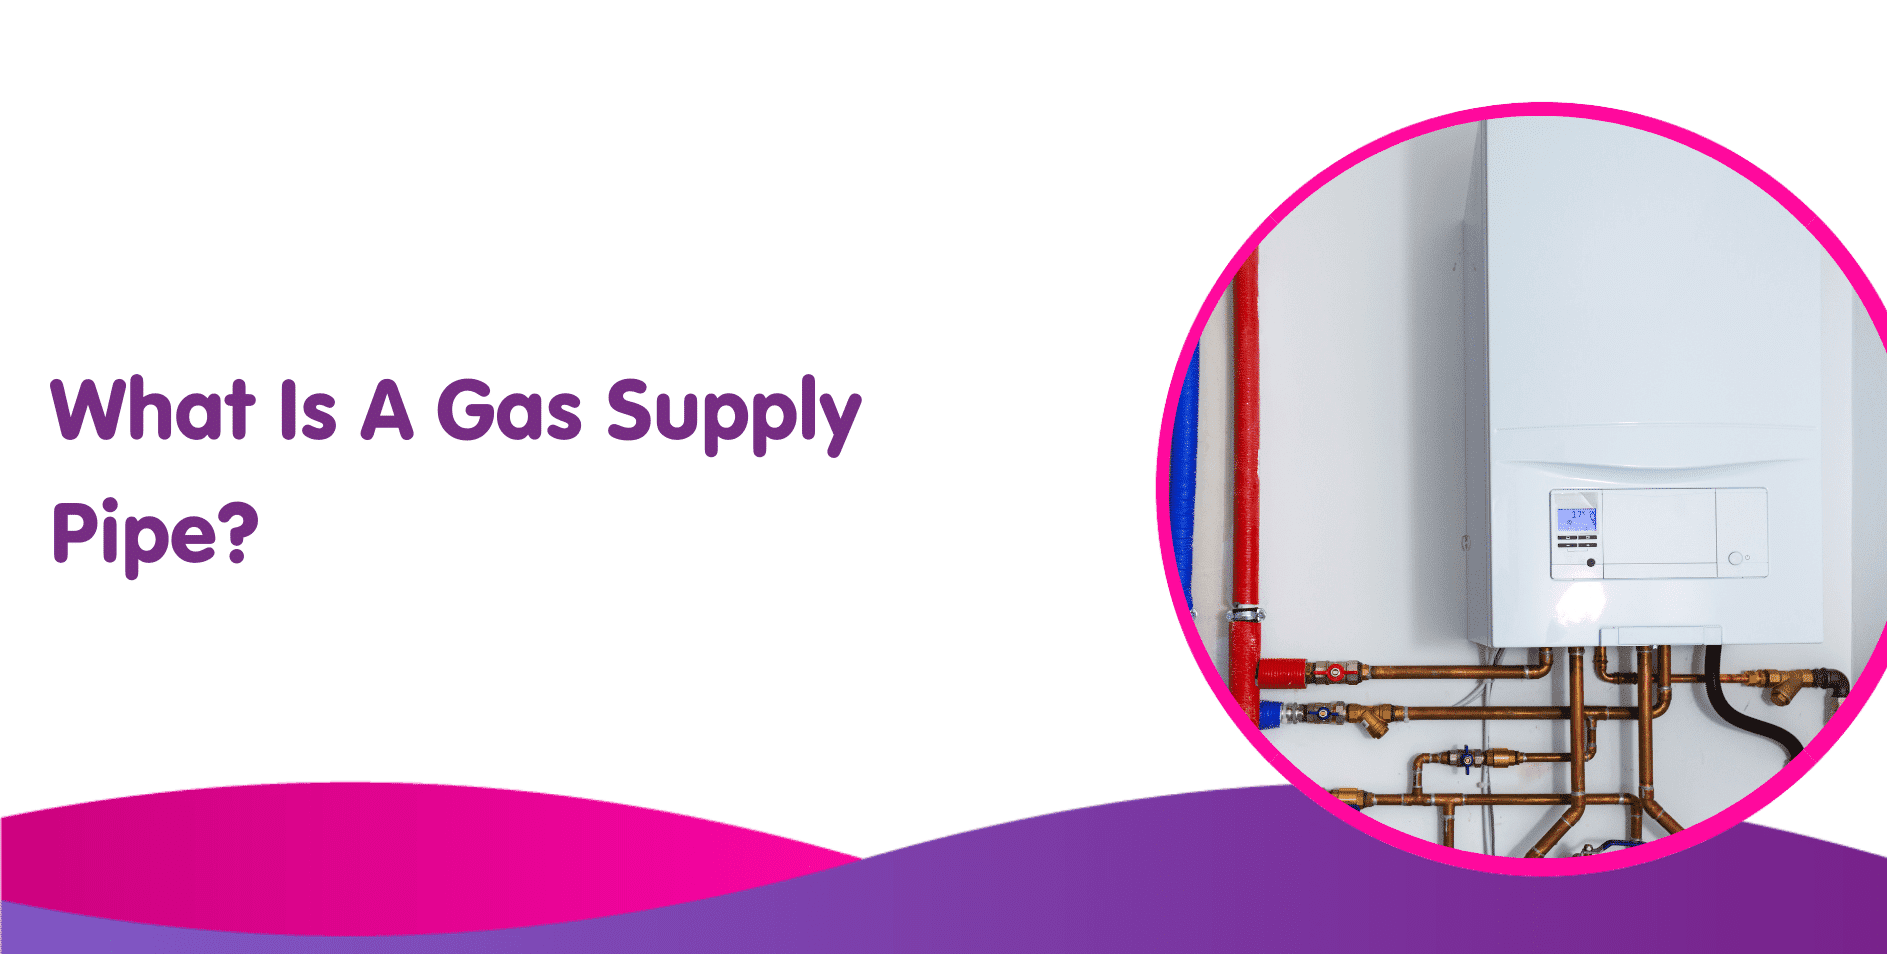 What Is A Gas Supply Pipe